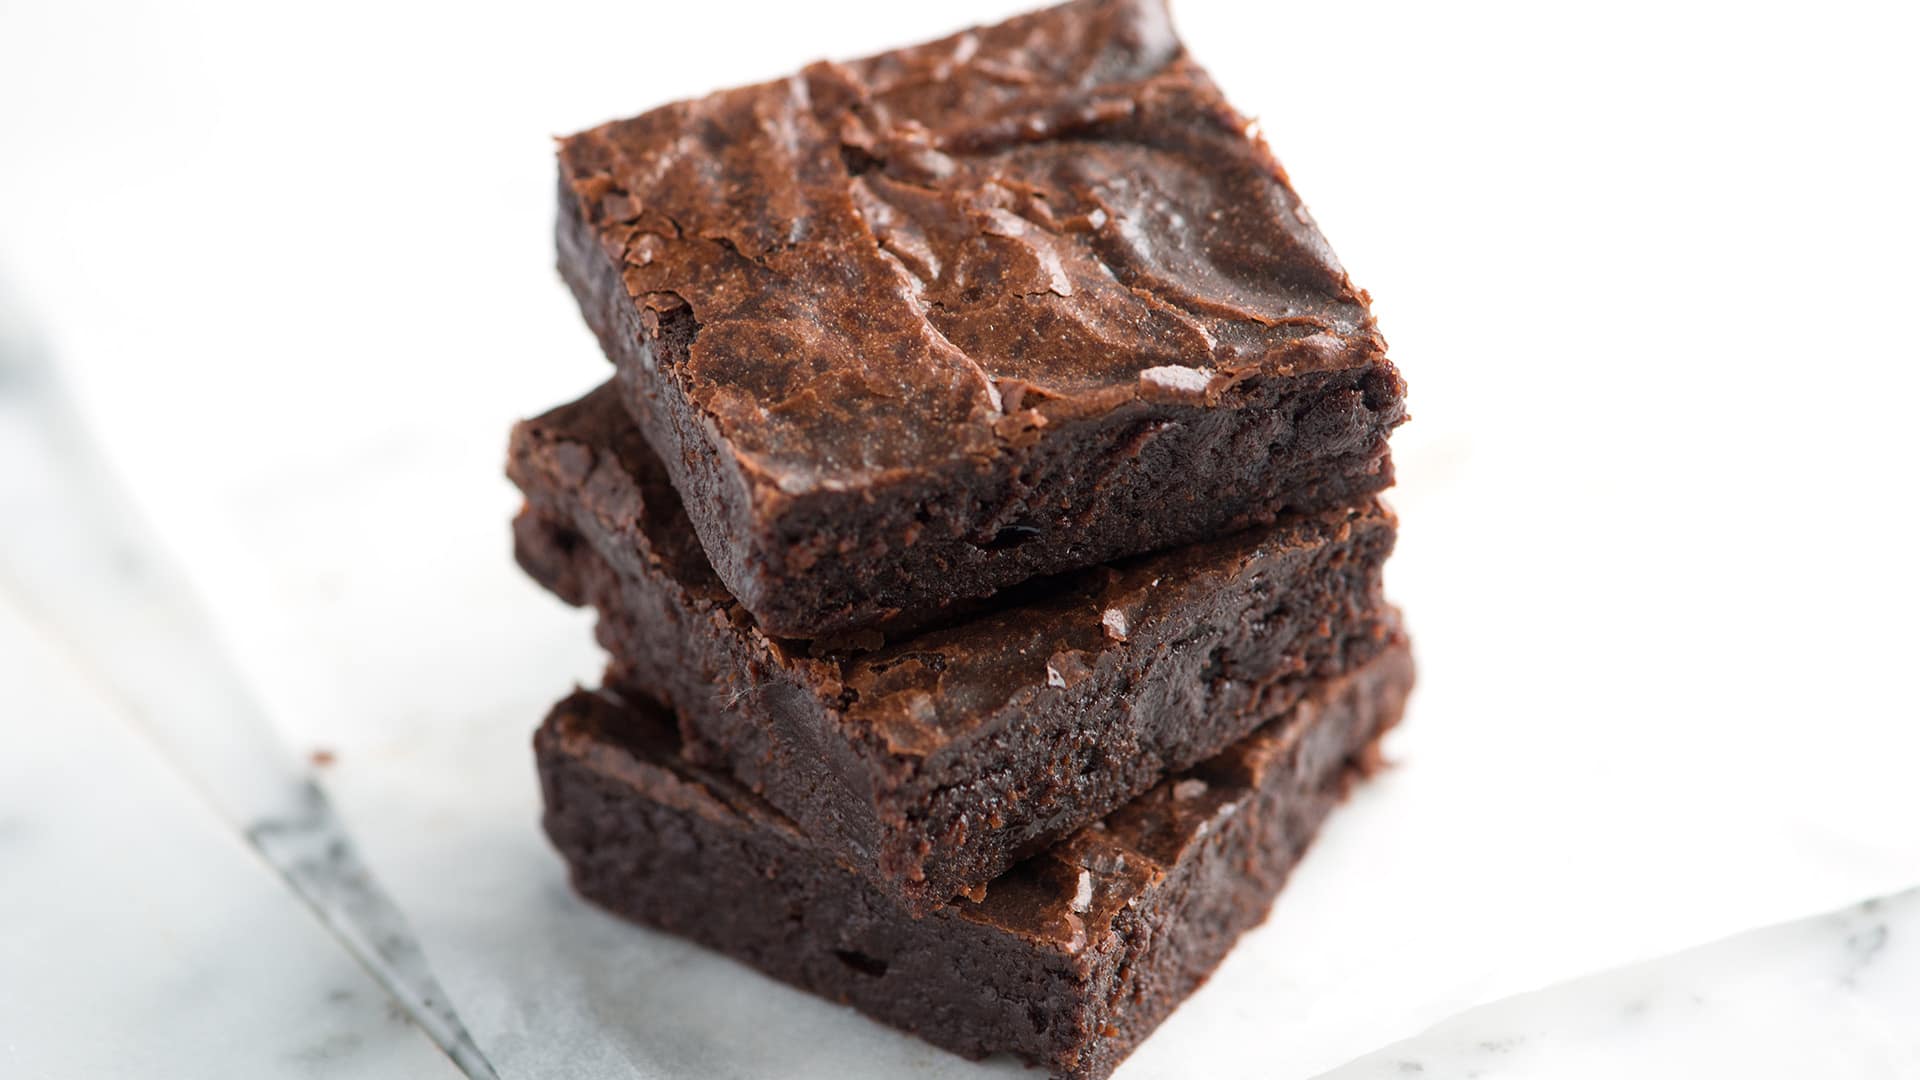 Parchment Paper Is The Ultimate Brownie Baking Hack